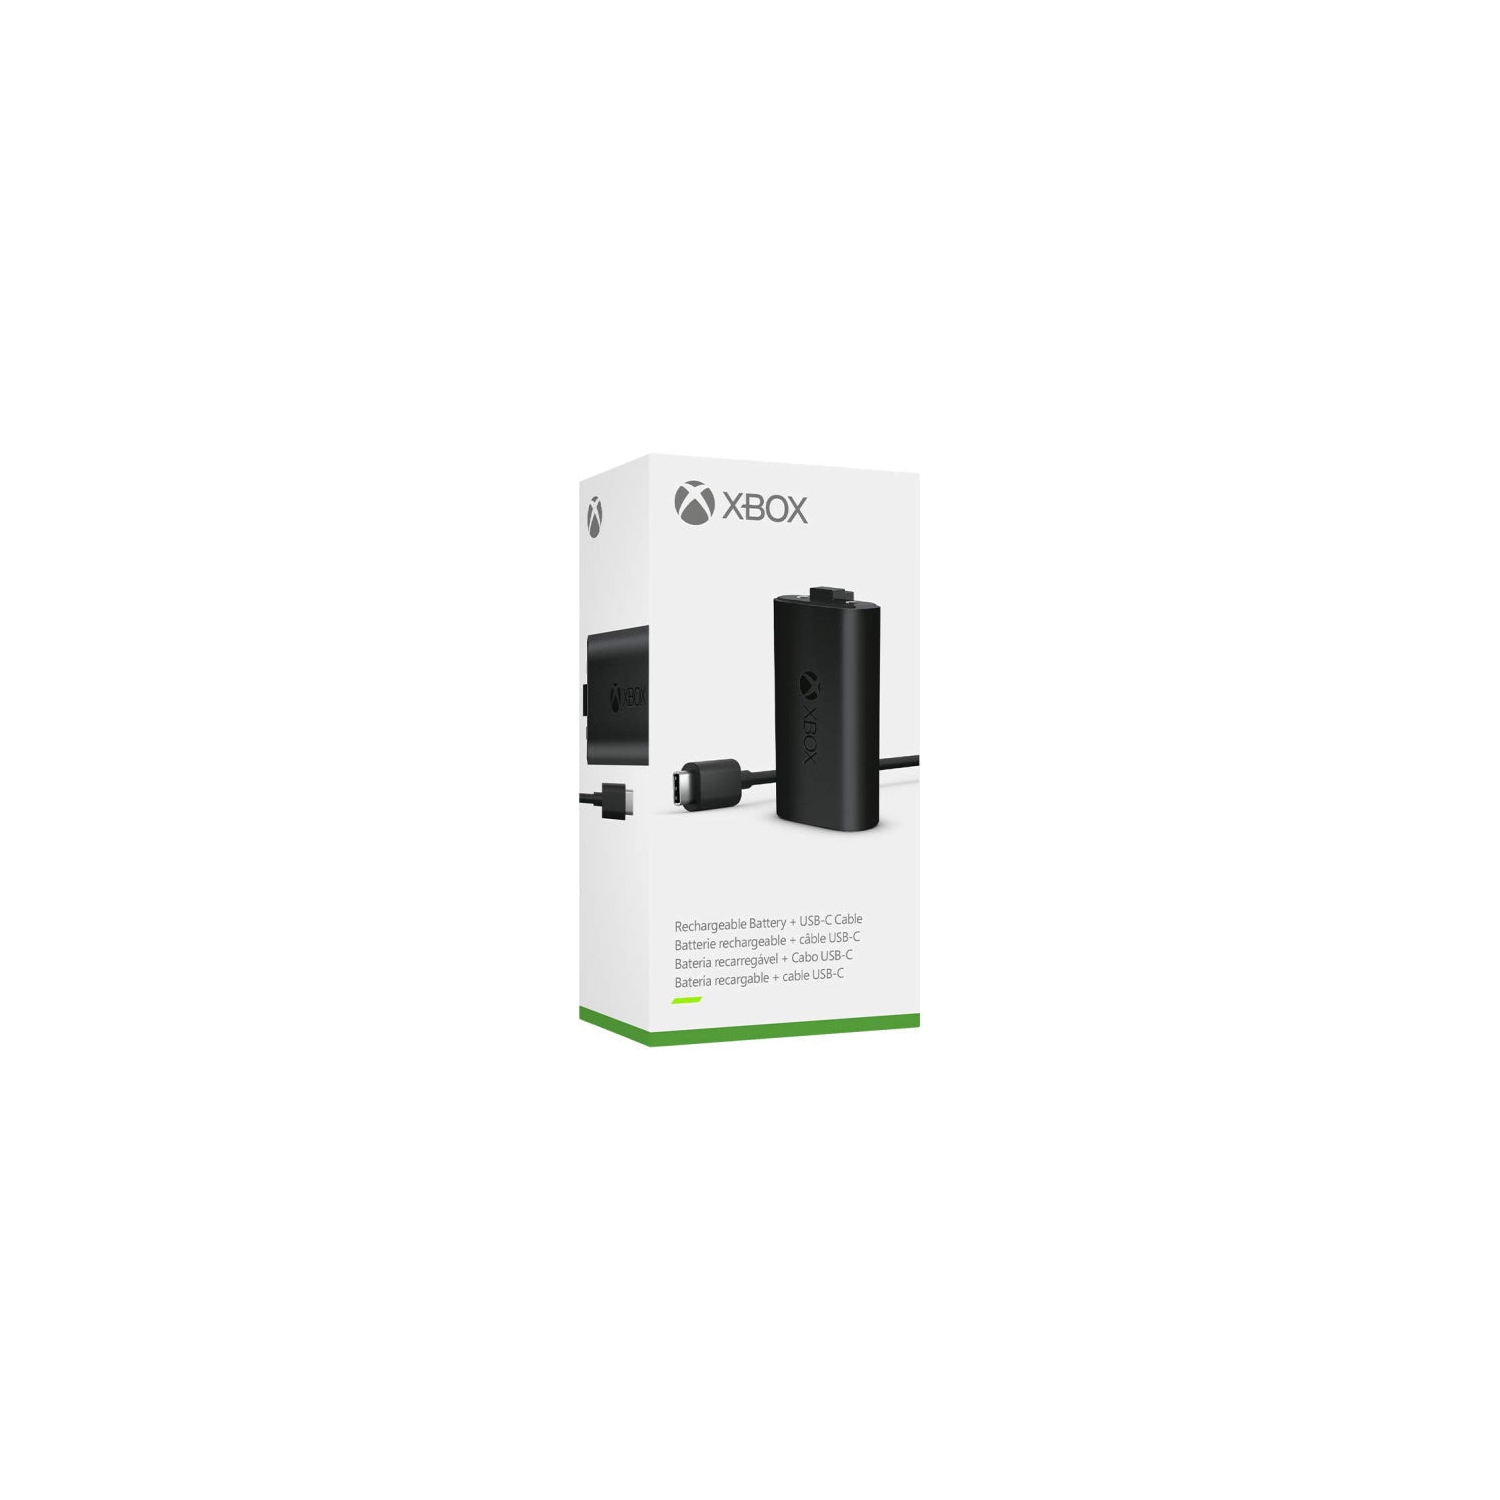 Xbox Rechargeable Battery + USB-C Cable [Xbox One Accessory]